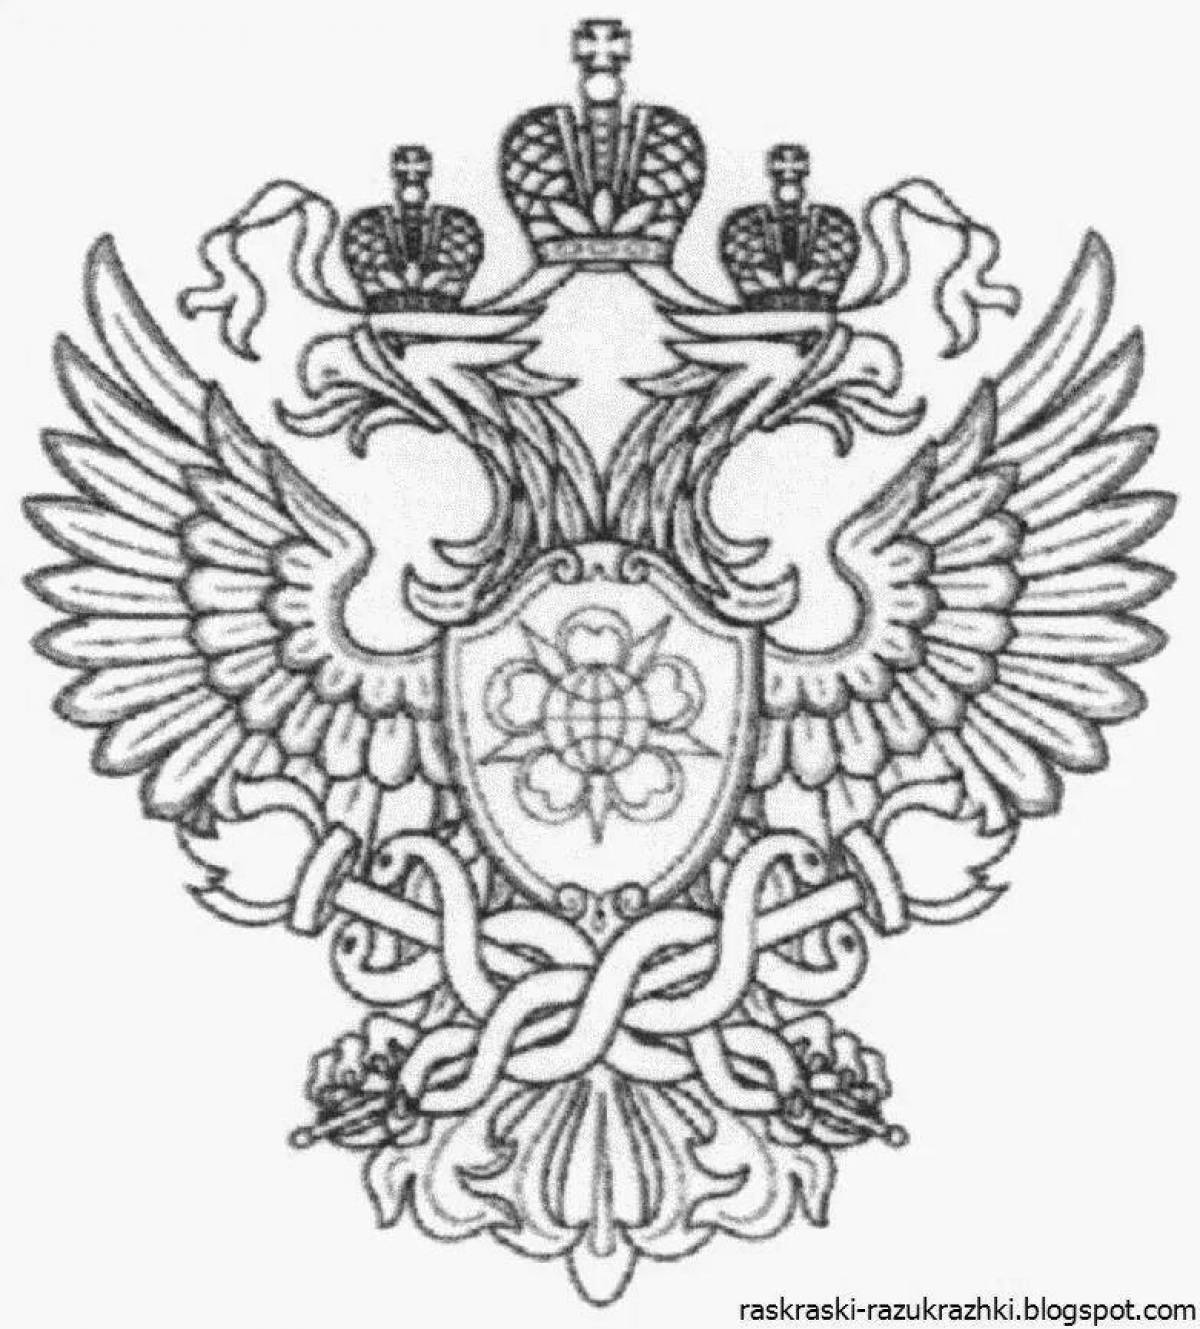 Coat of arms of the Russian Federation #5